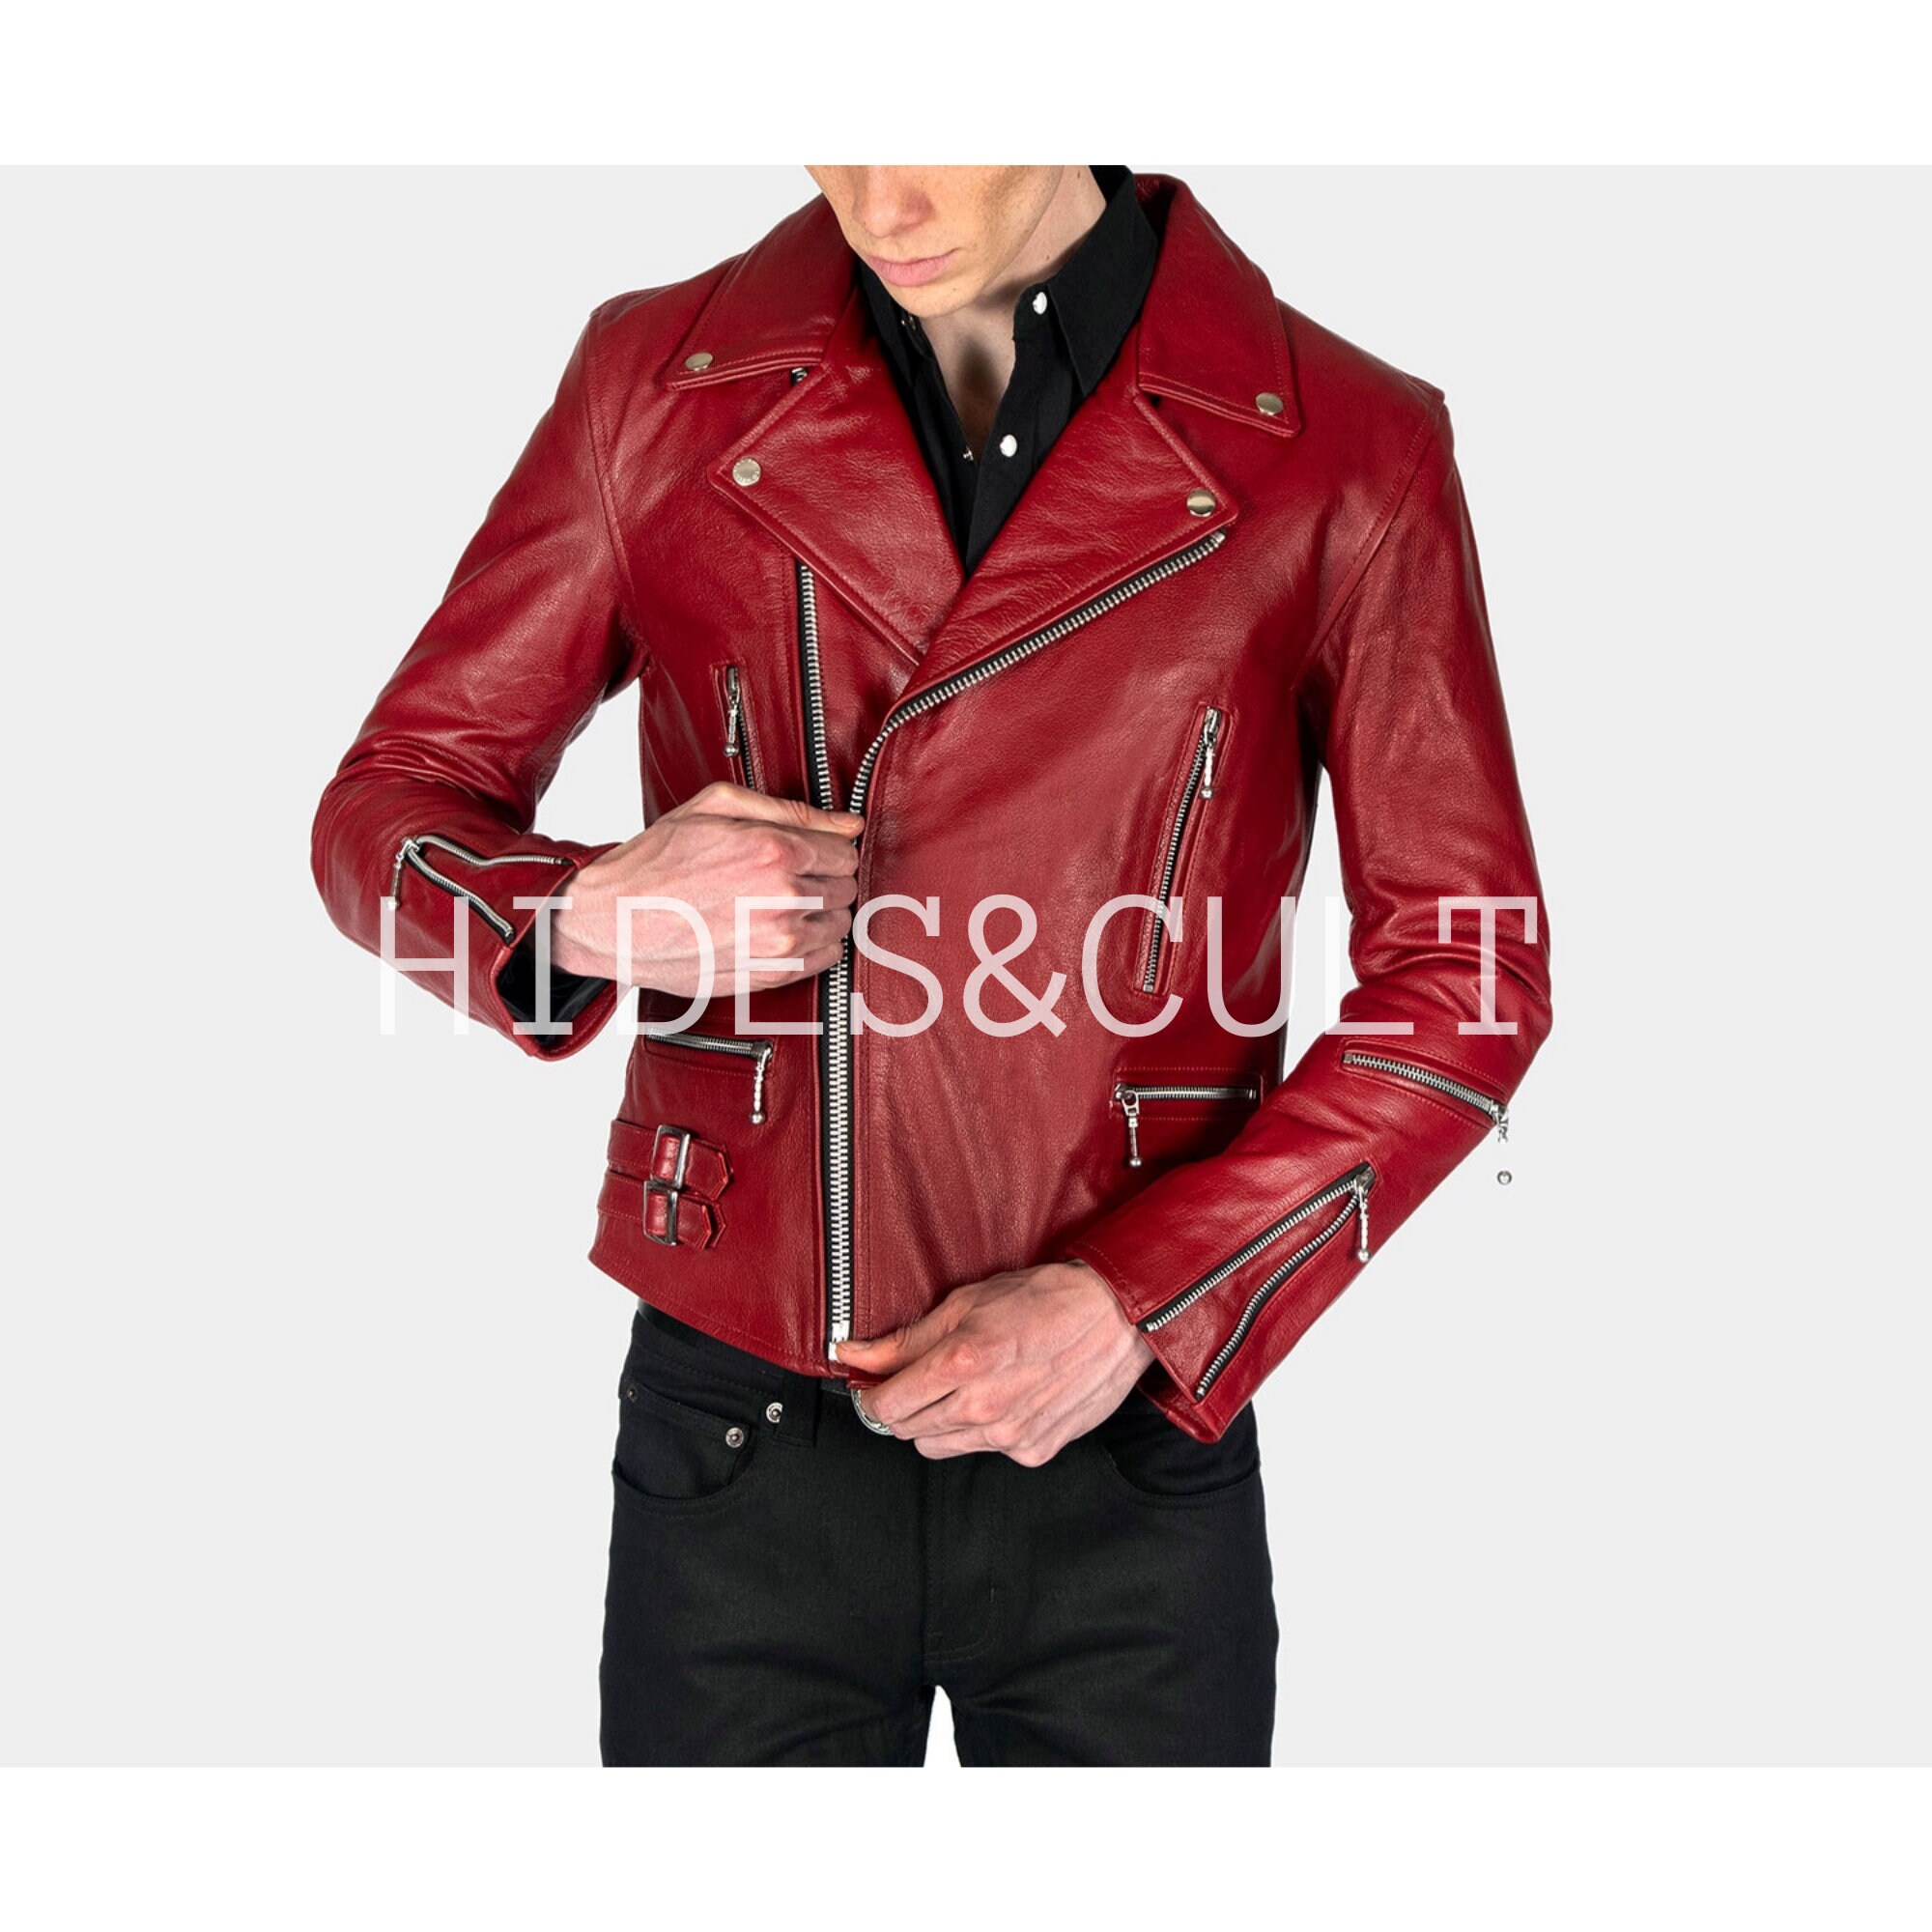 Mens Black & Red Hooded Leather Jacket - Limited Edition - Custom Size / Real Leather